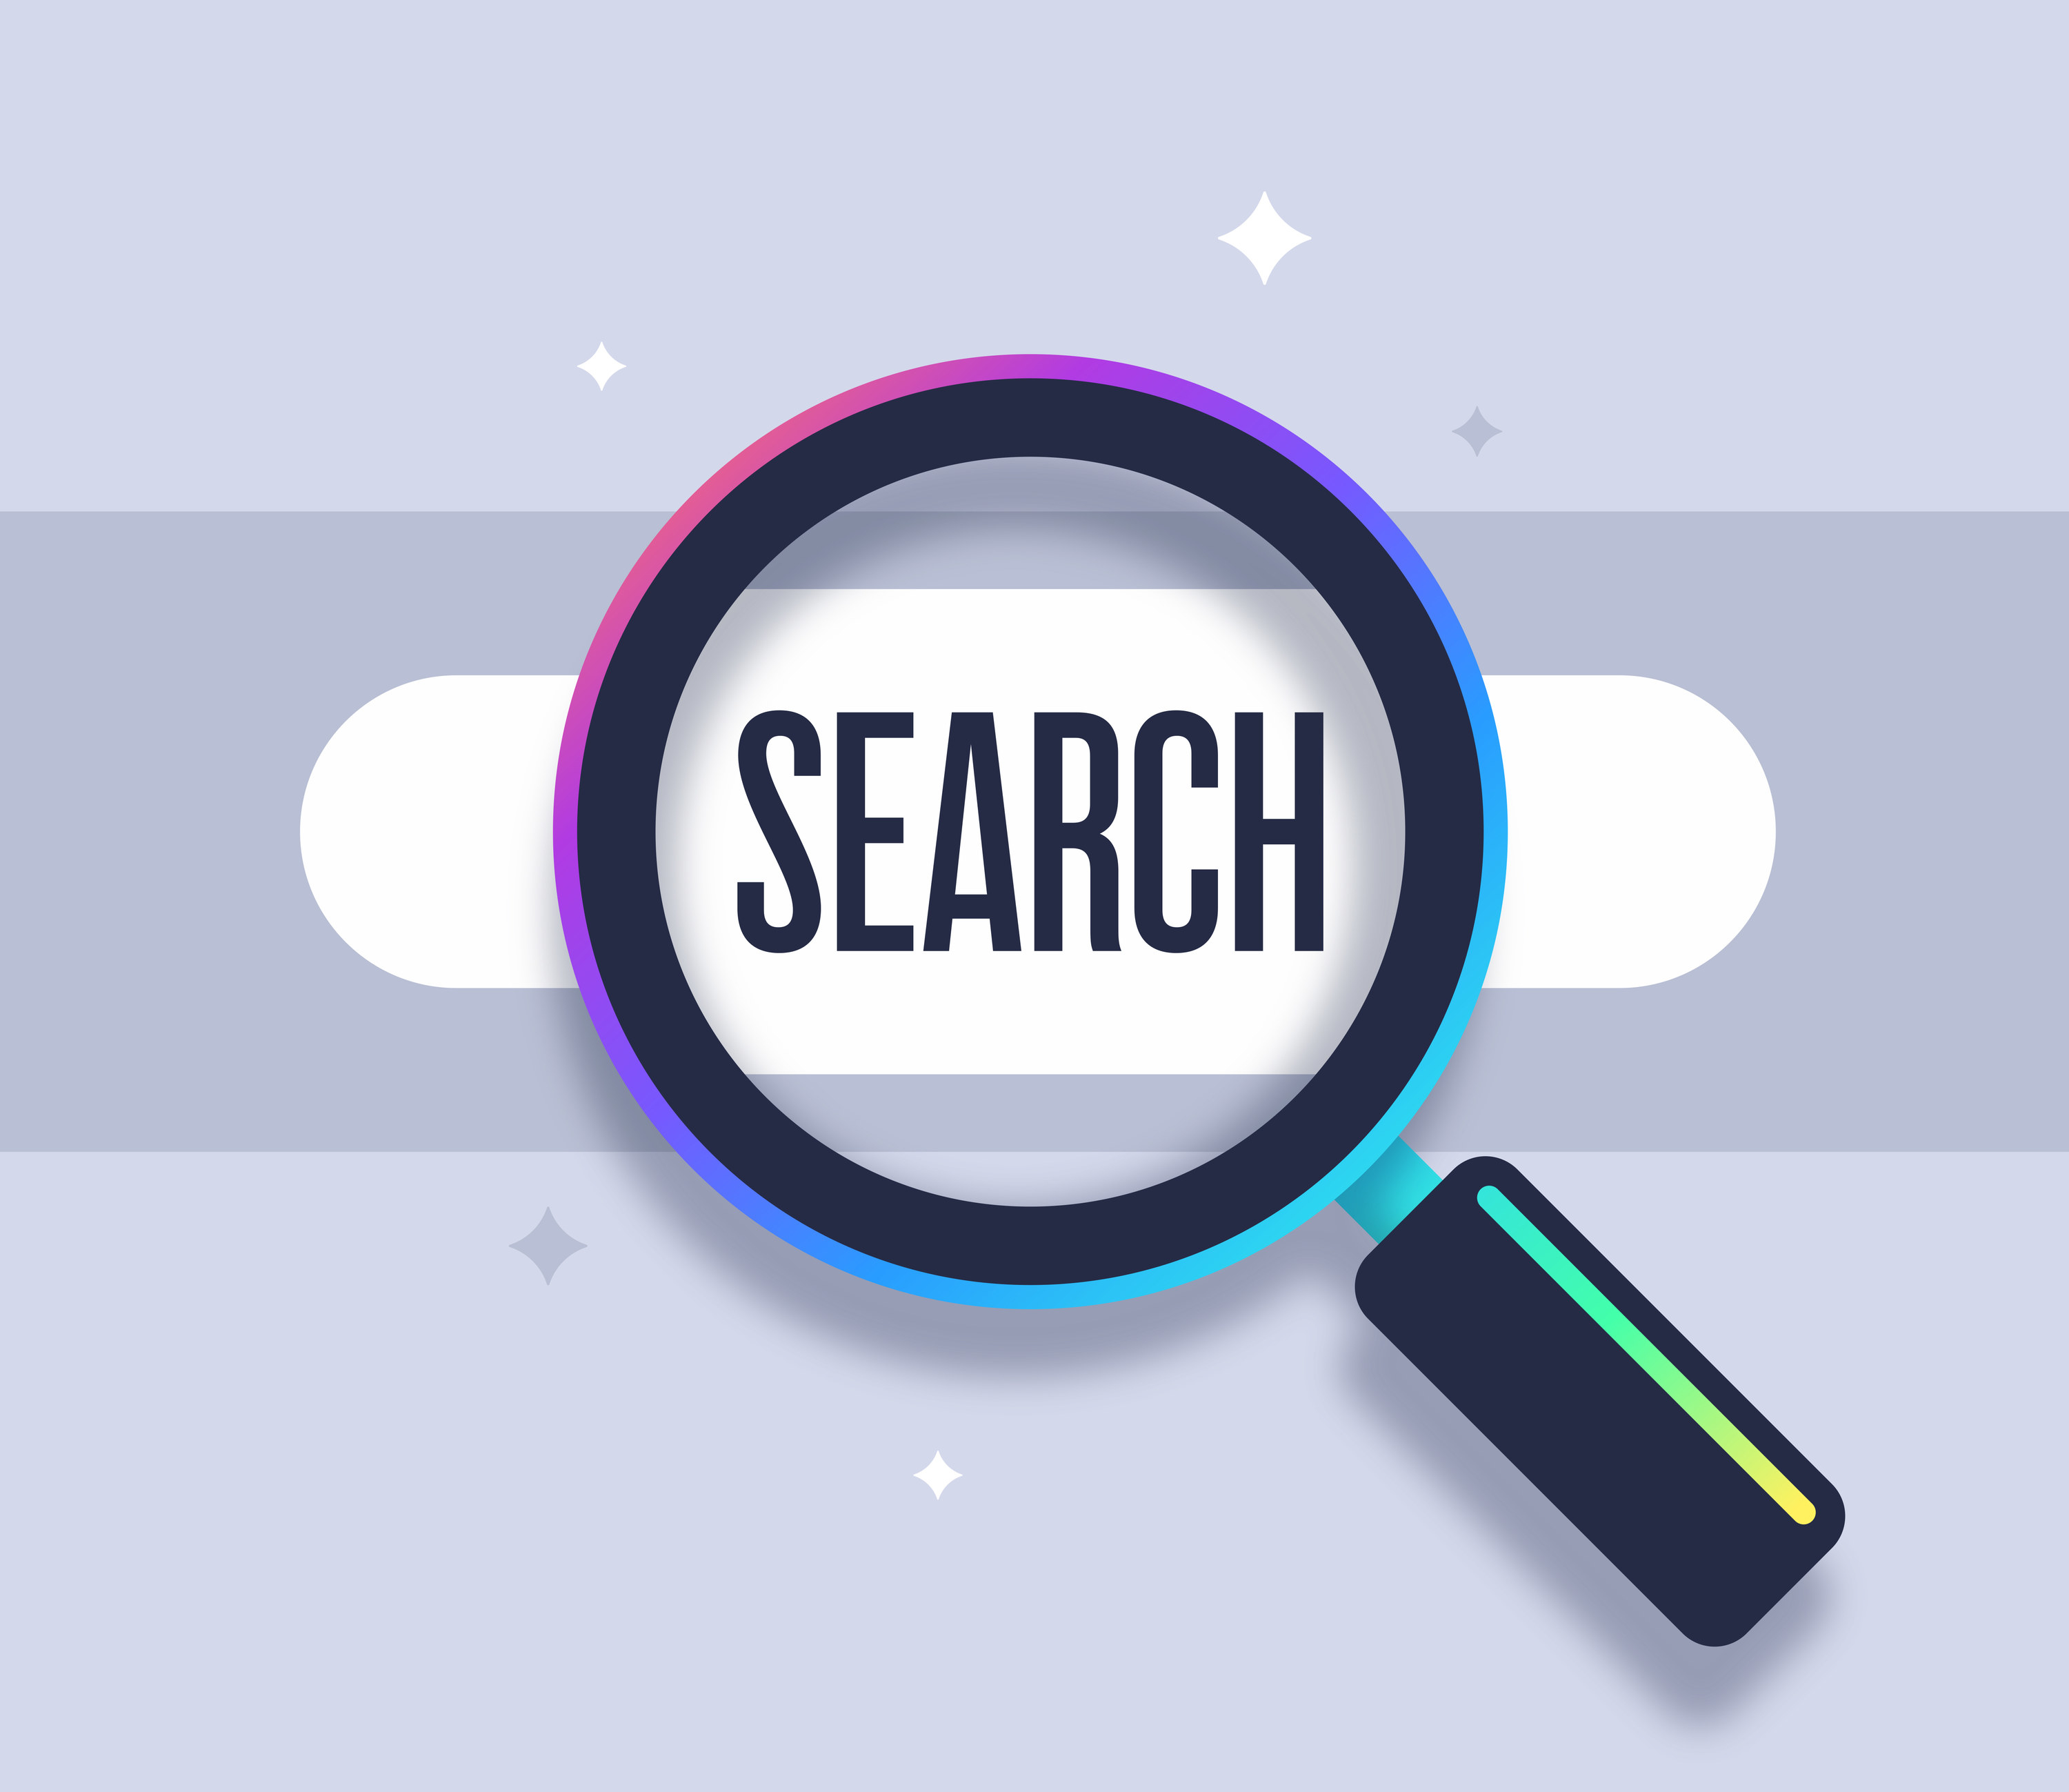 An illustrated search button